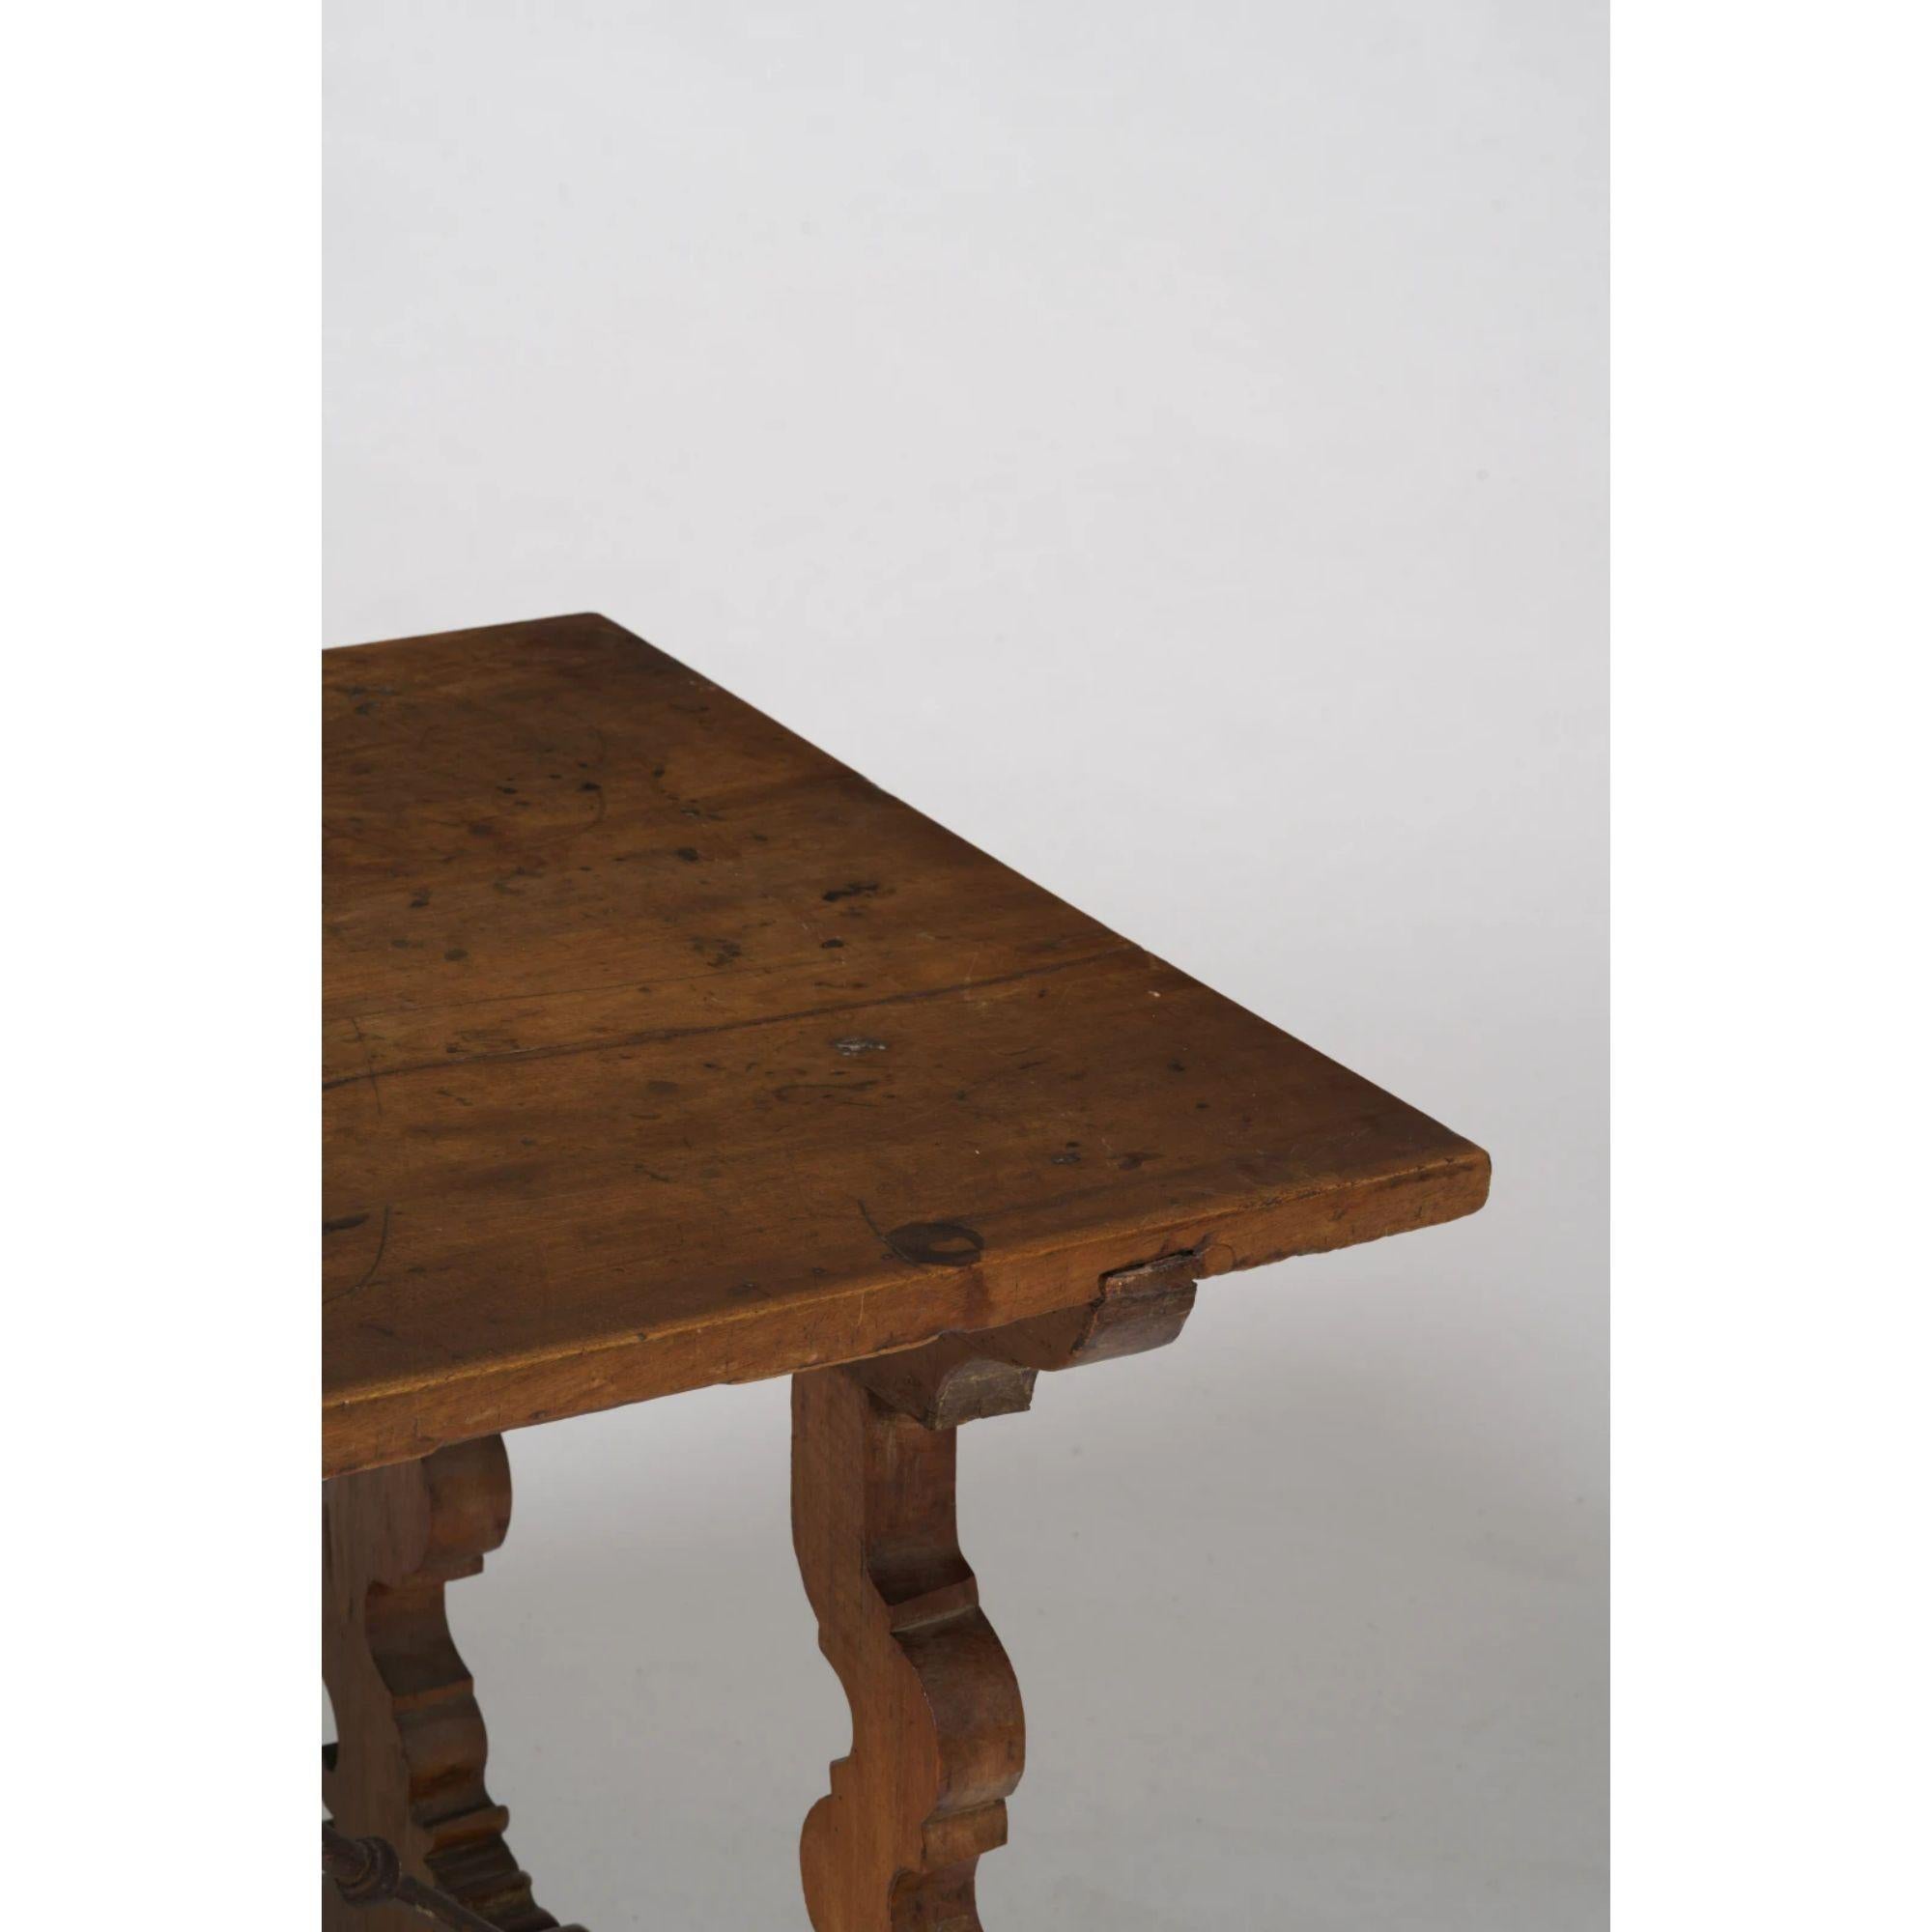 Italian Walnut 'Fratino' table, 19h Century

A well proportioned 19th Century Italian 'Fratino' table in walnut, with lyre shaped legs and wrought iron supports.

Solid construction with a rich patina. Various old knocks, stains and splits that